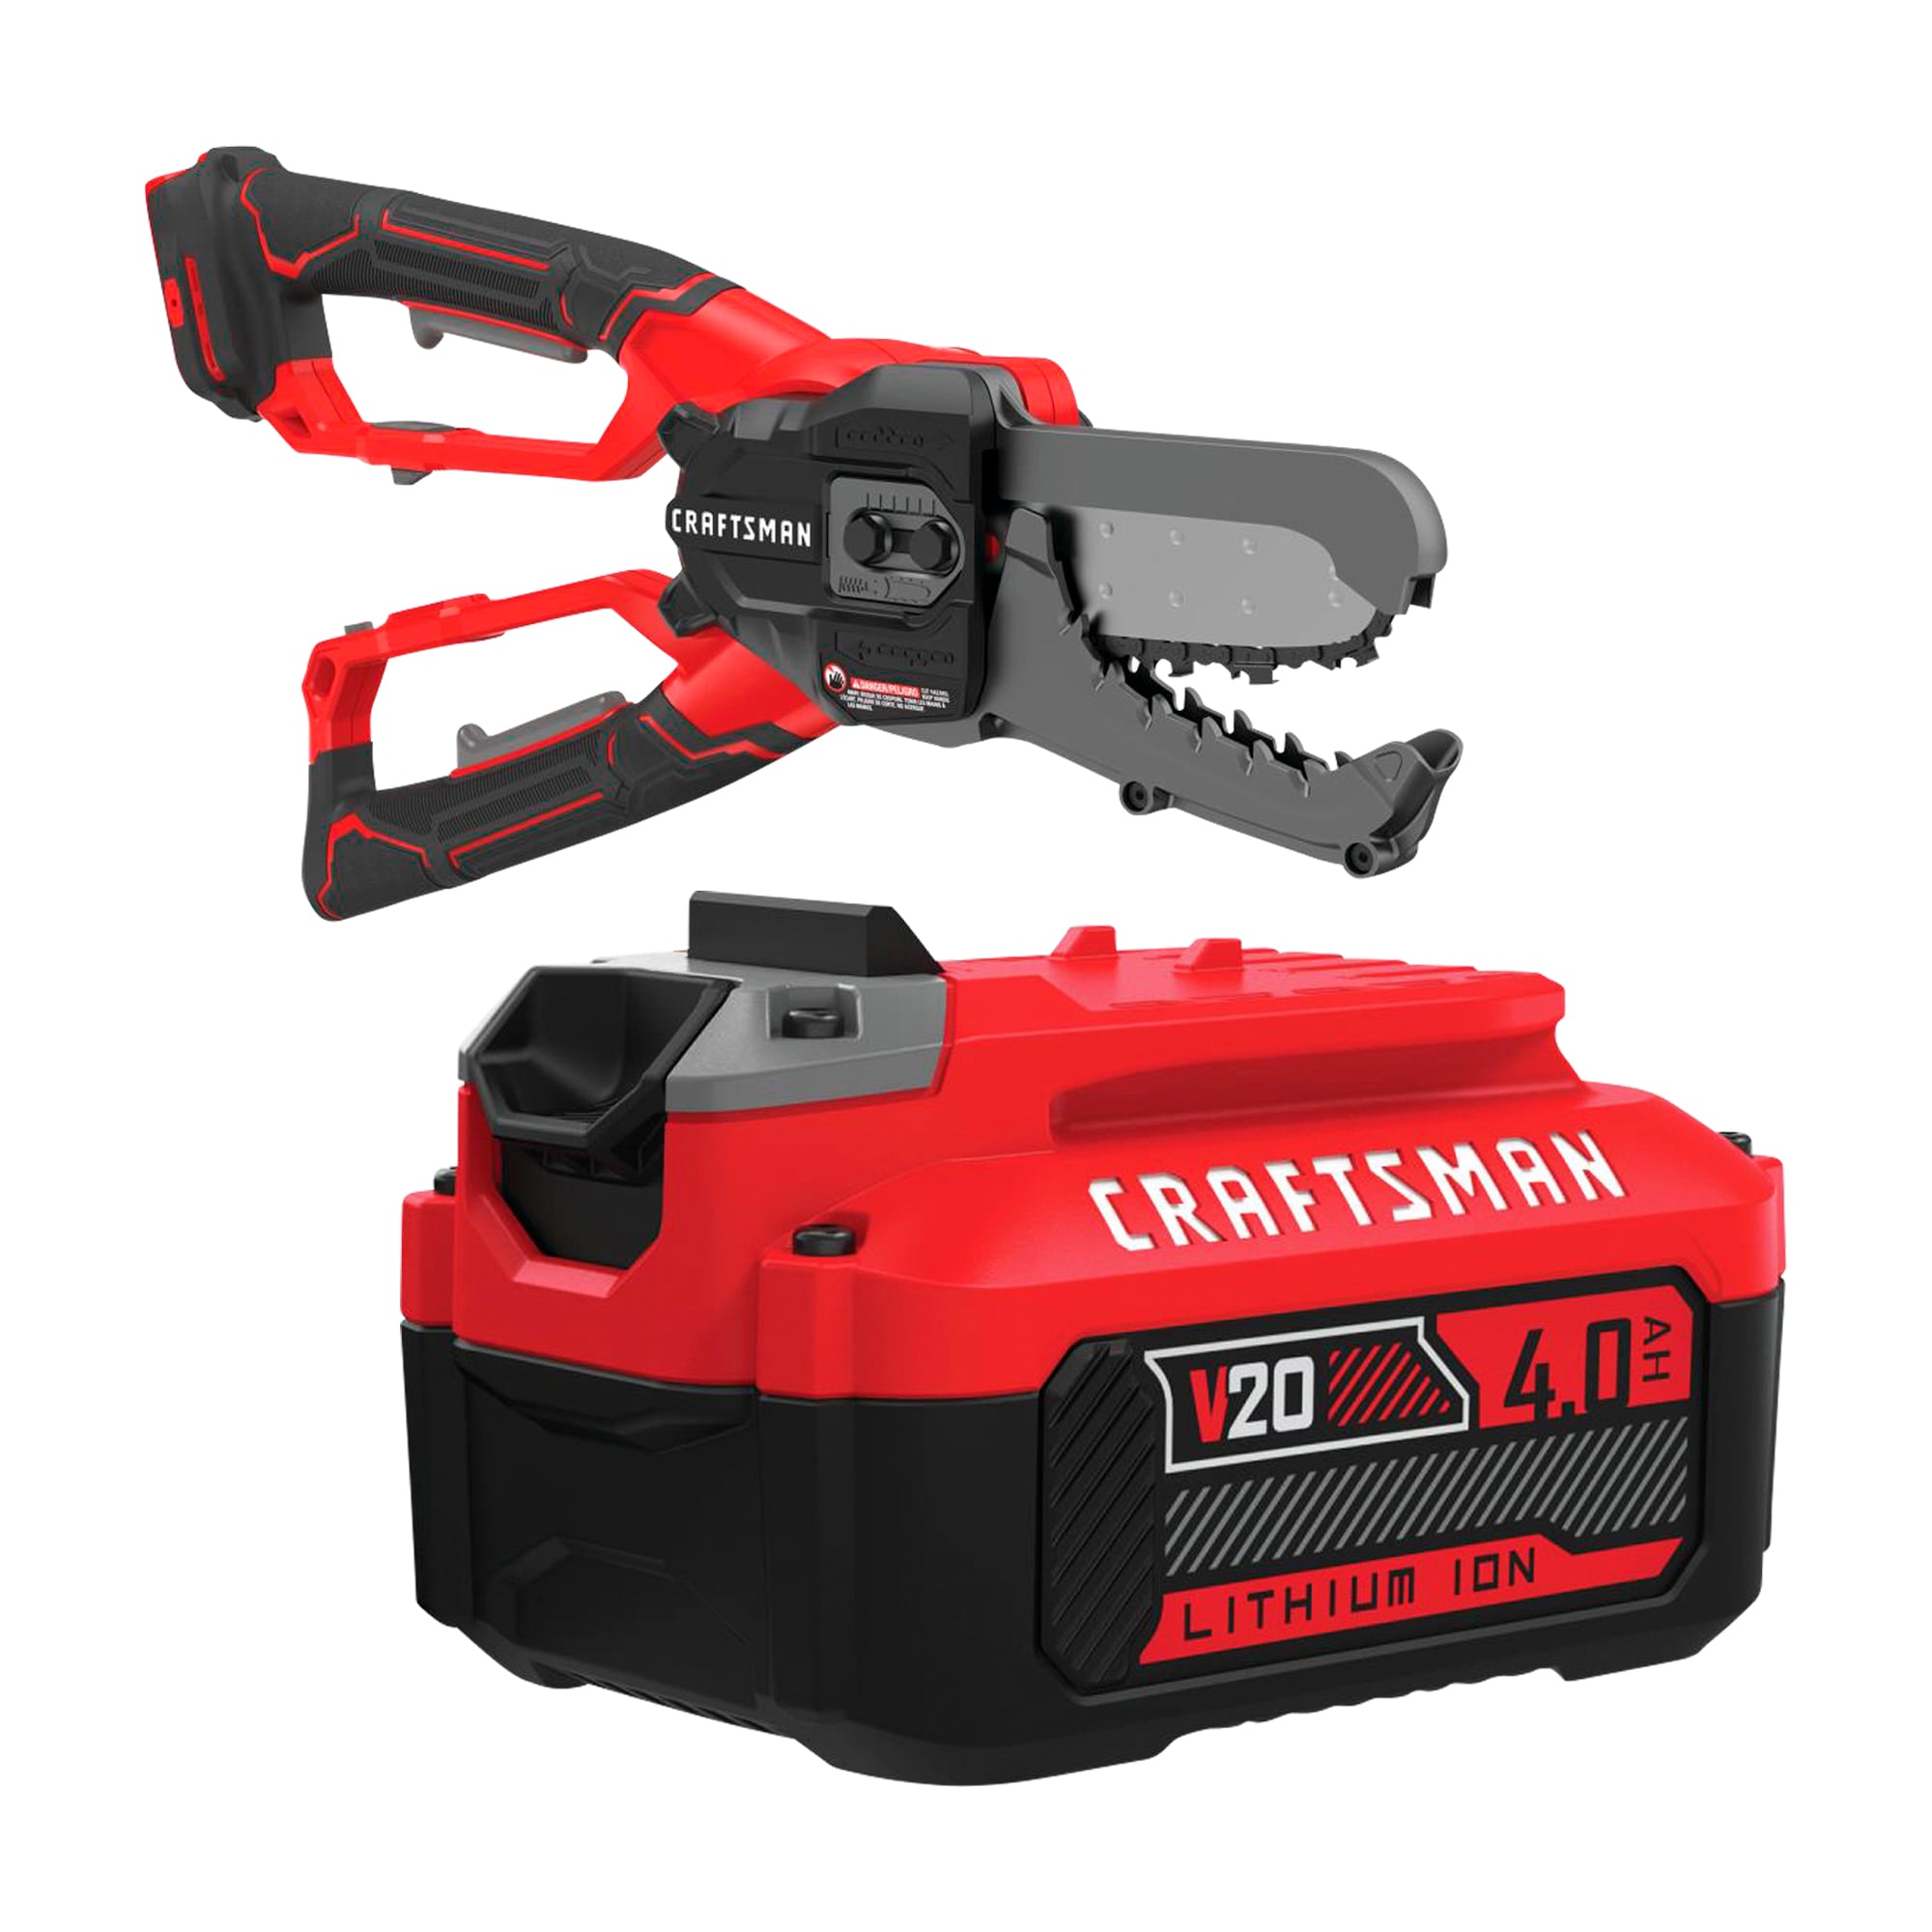 CRAFTSMAN V20 20-volt Max 6-in Cordless Electric Chainsaw & 20-Volt Max 4 Ah Rechargeable Lithium Ion (Li-Ion) Cordless Power Equipment Battery